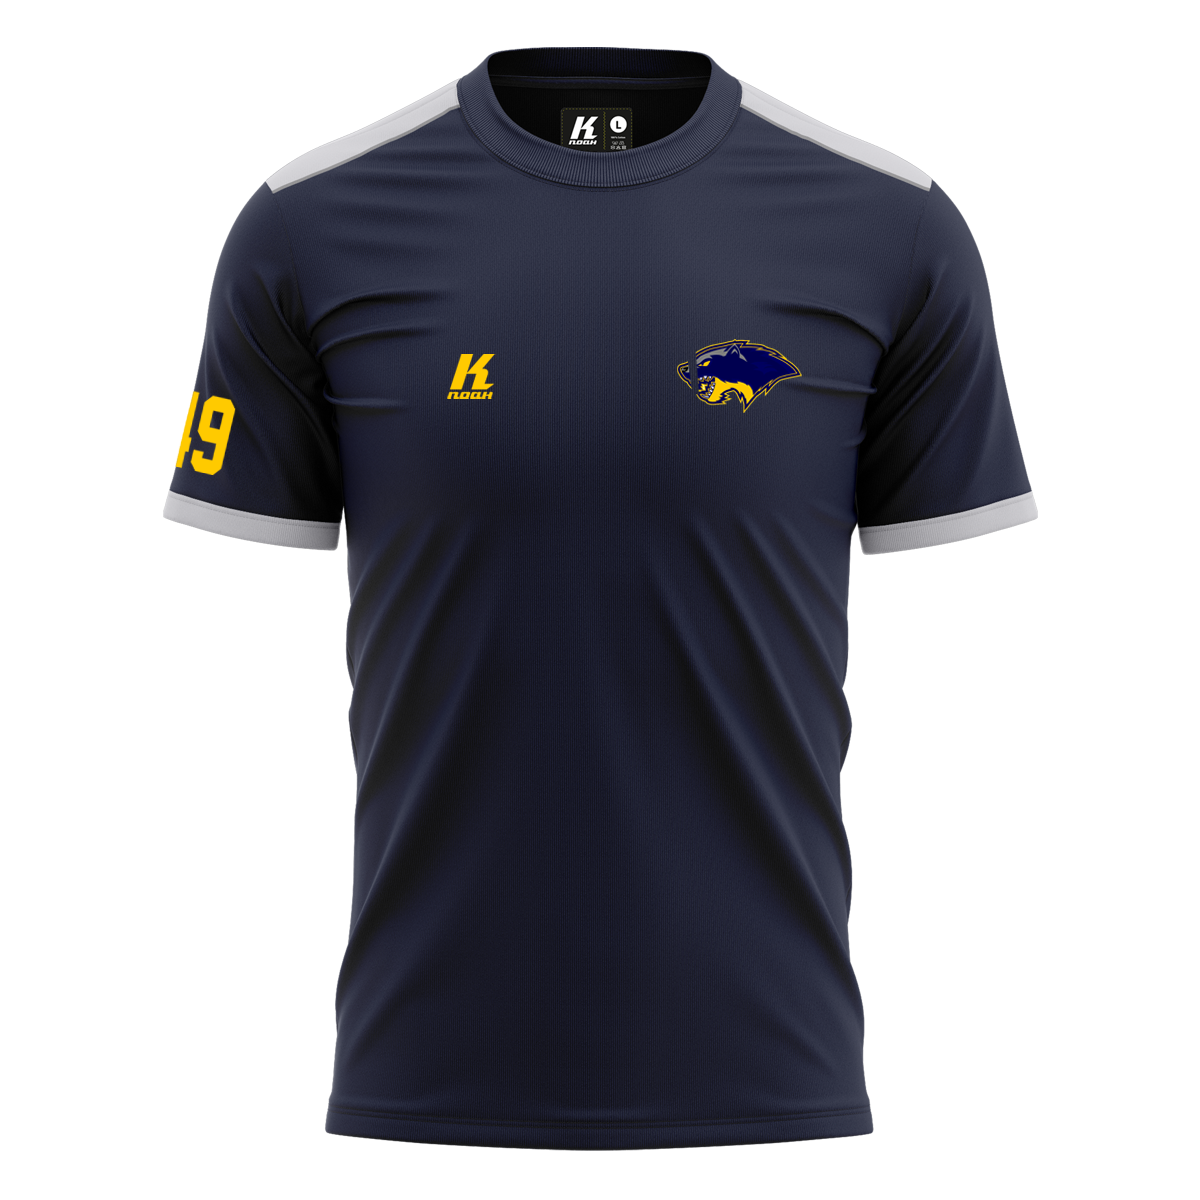 Wolverines K.Tech-Fiber T-Shirt “Heritage” with Playernumber/Initials